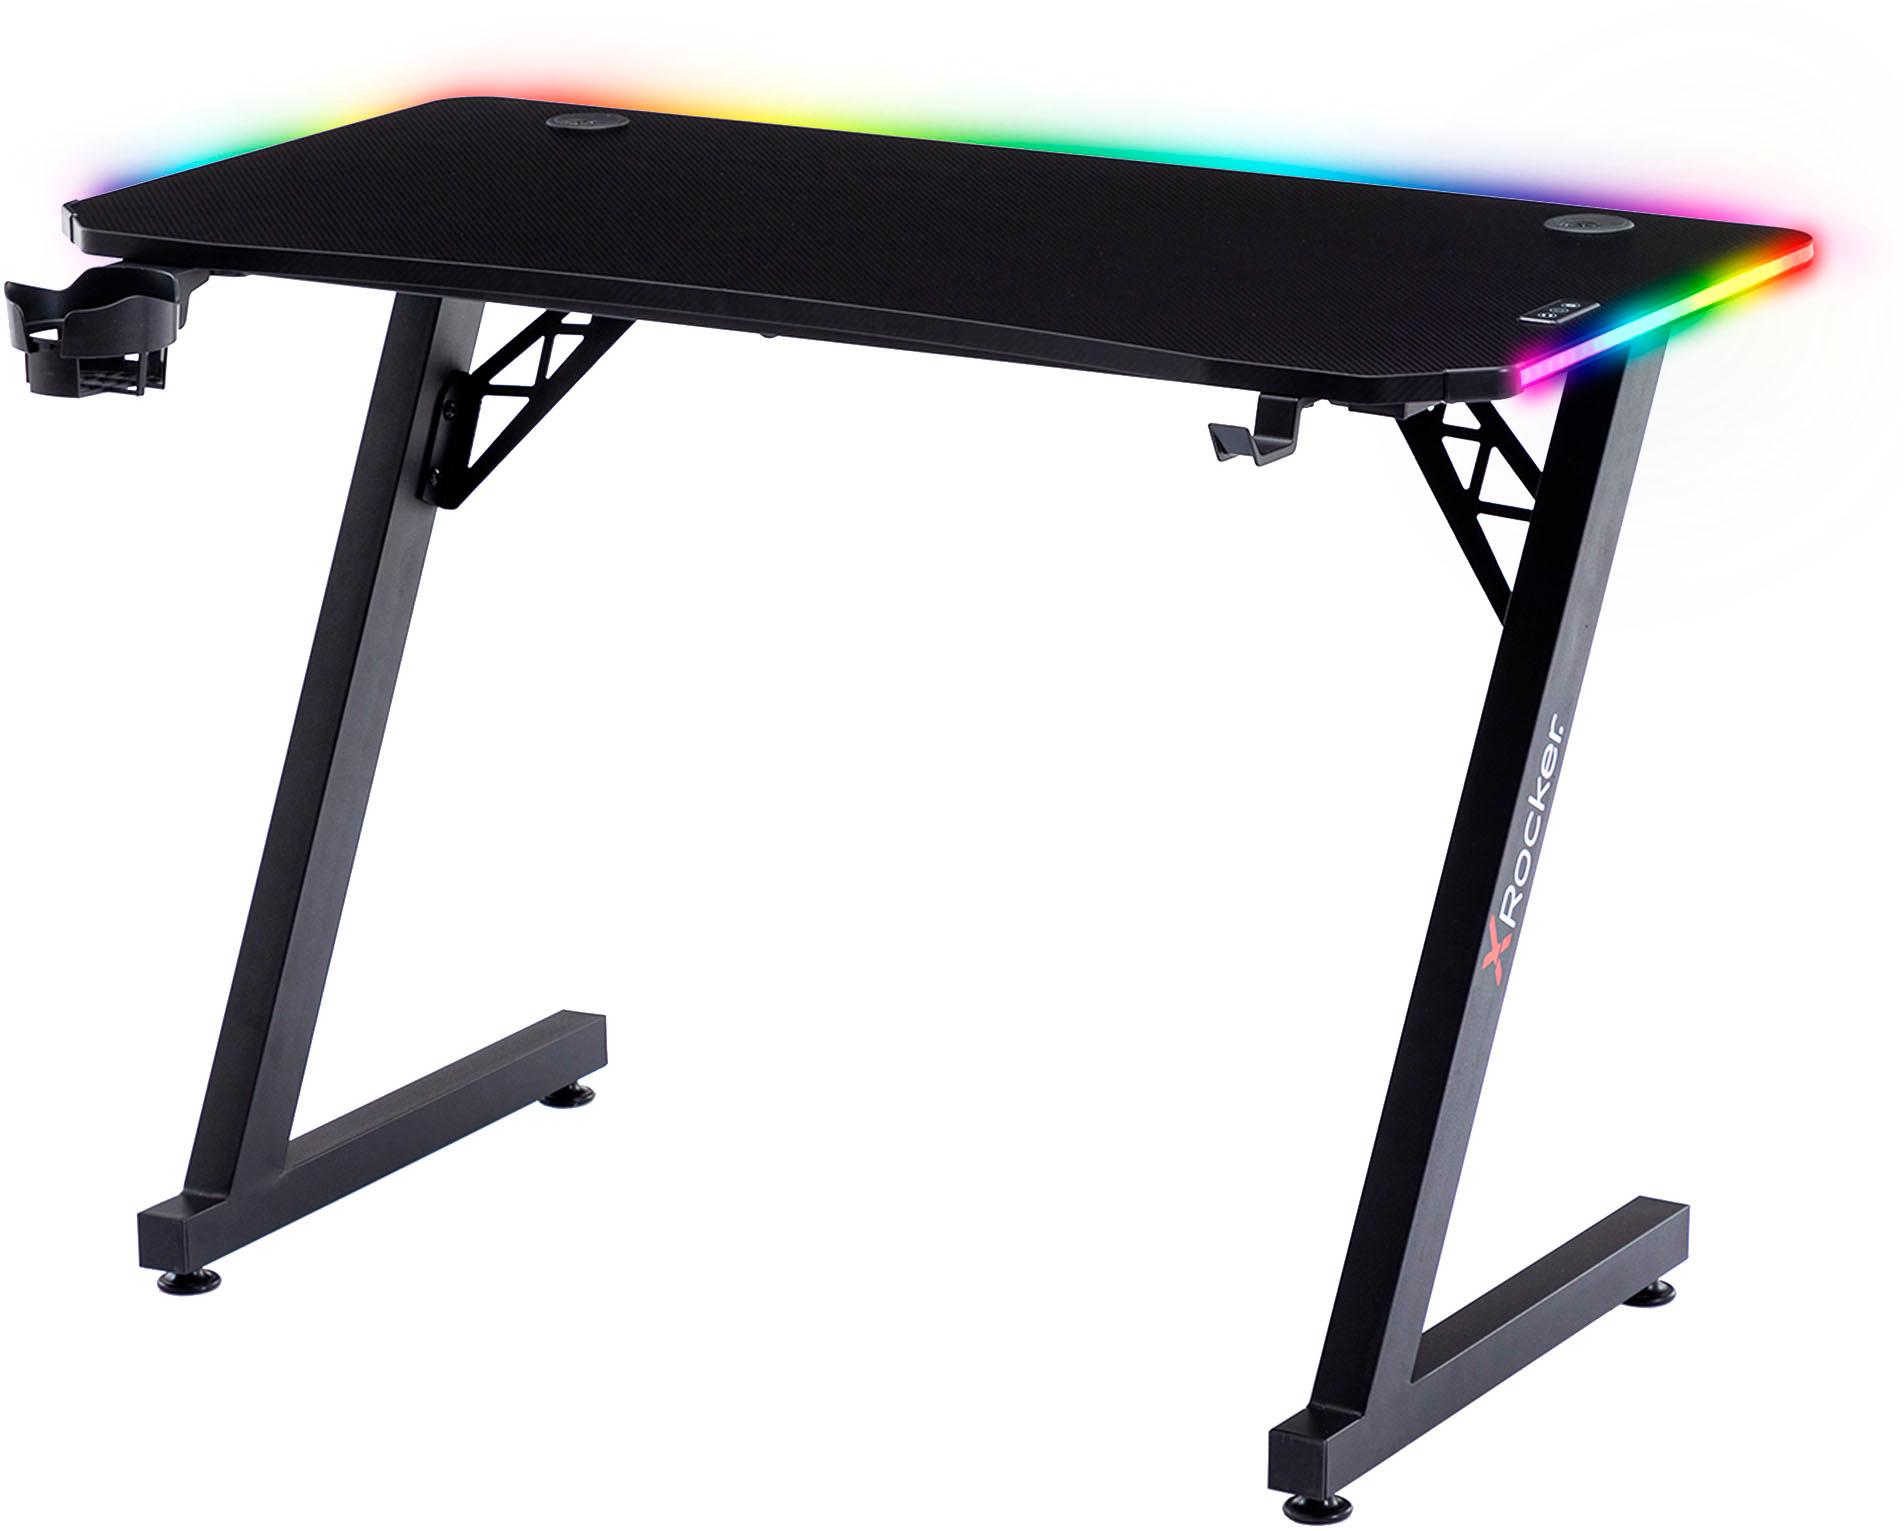 Angle View: SD Gaming - Overlord Curved Table - Black